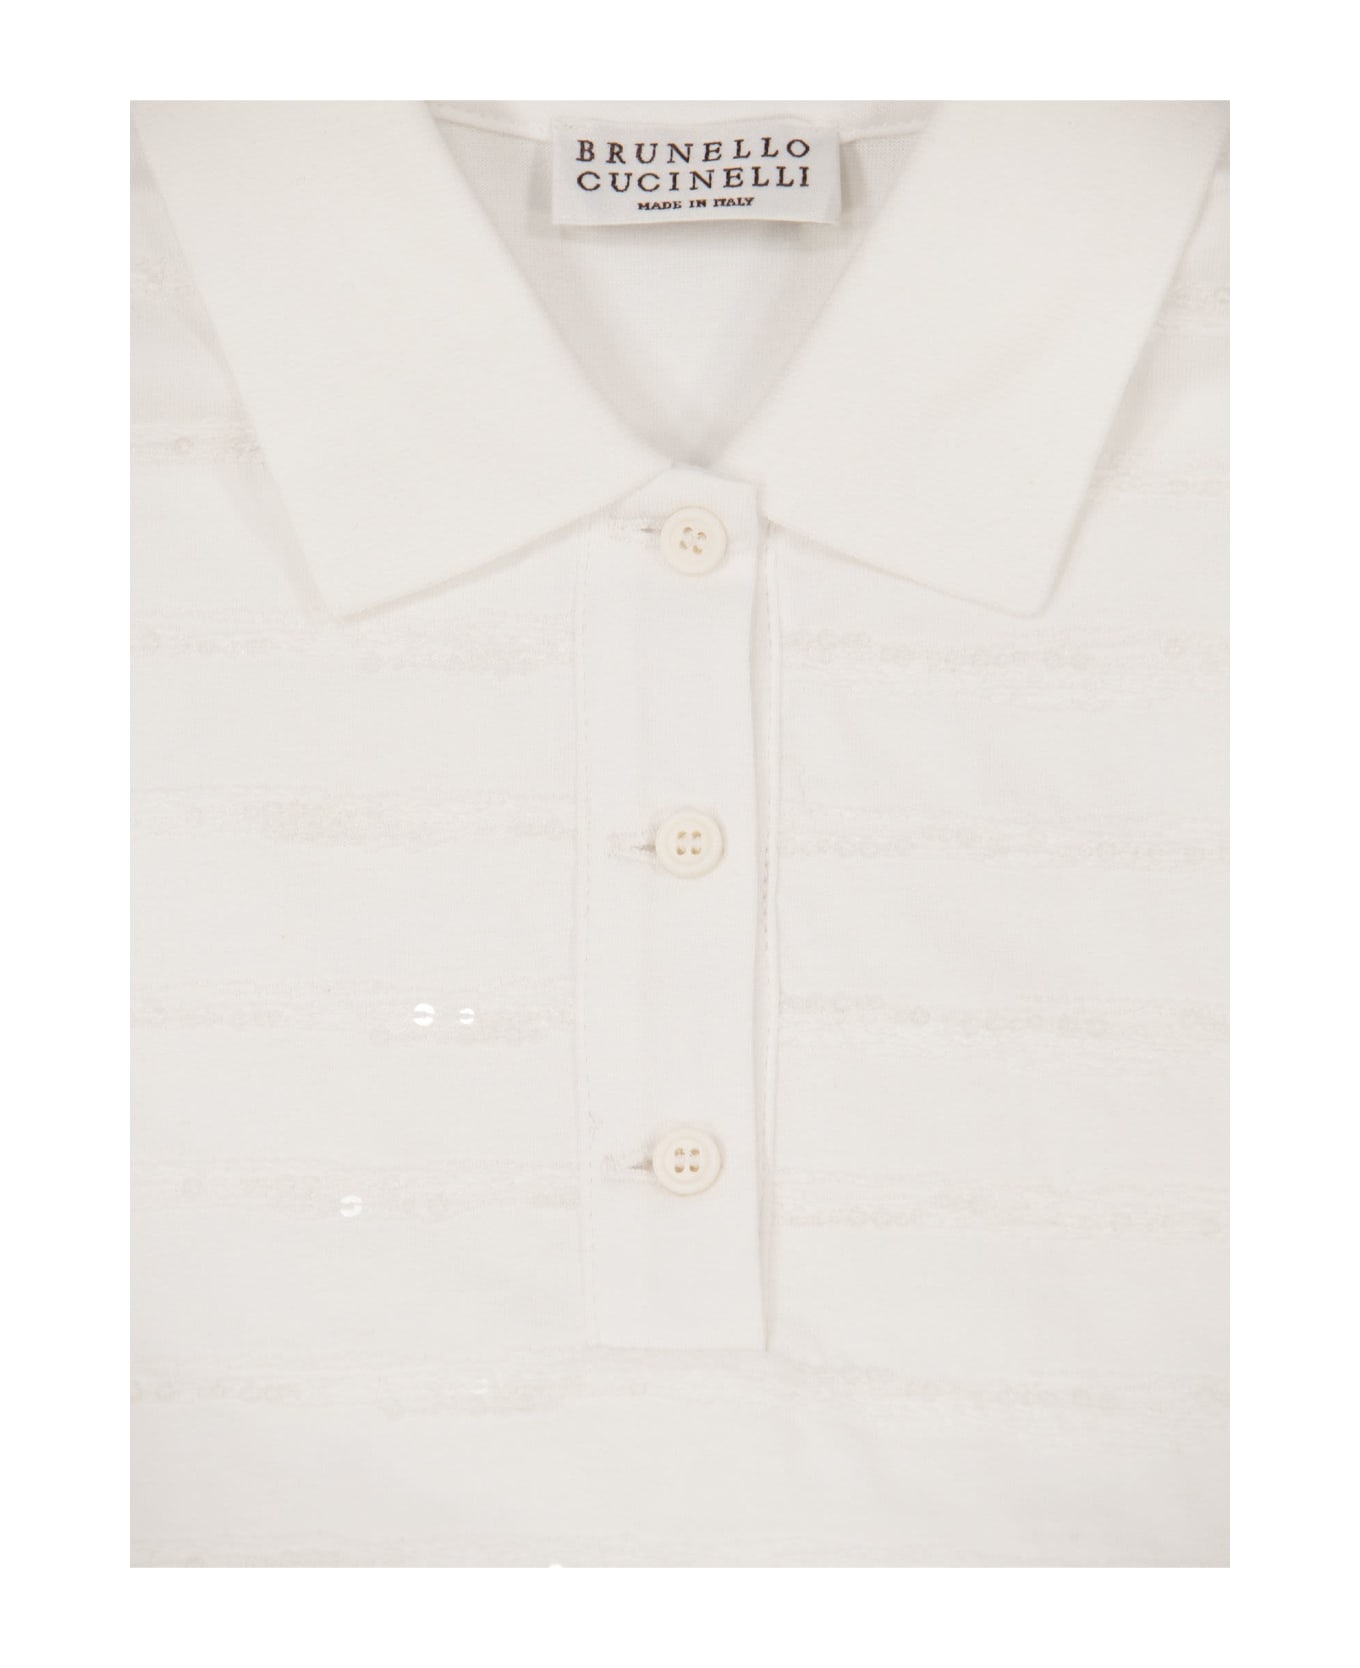 Brunello Cucinelli Light Cotton Jersey Polo Shirt With Dazzling Brushstoke Embroidery - White